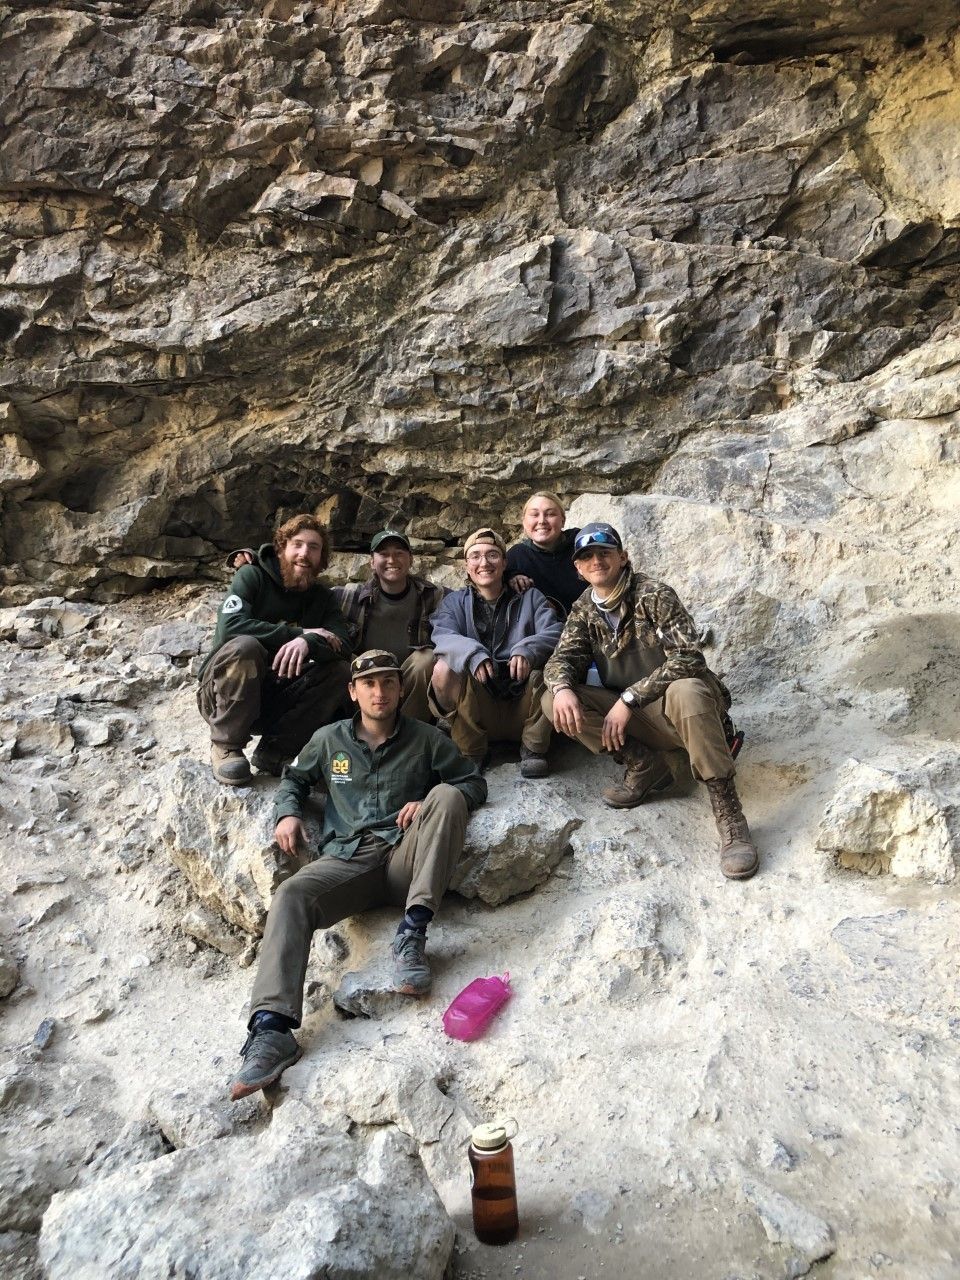 A crew sits together smiling in front of a rock wall